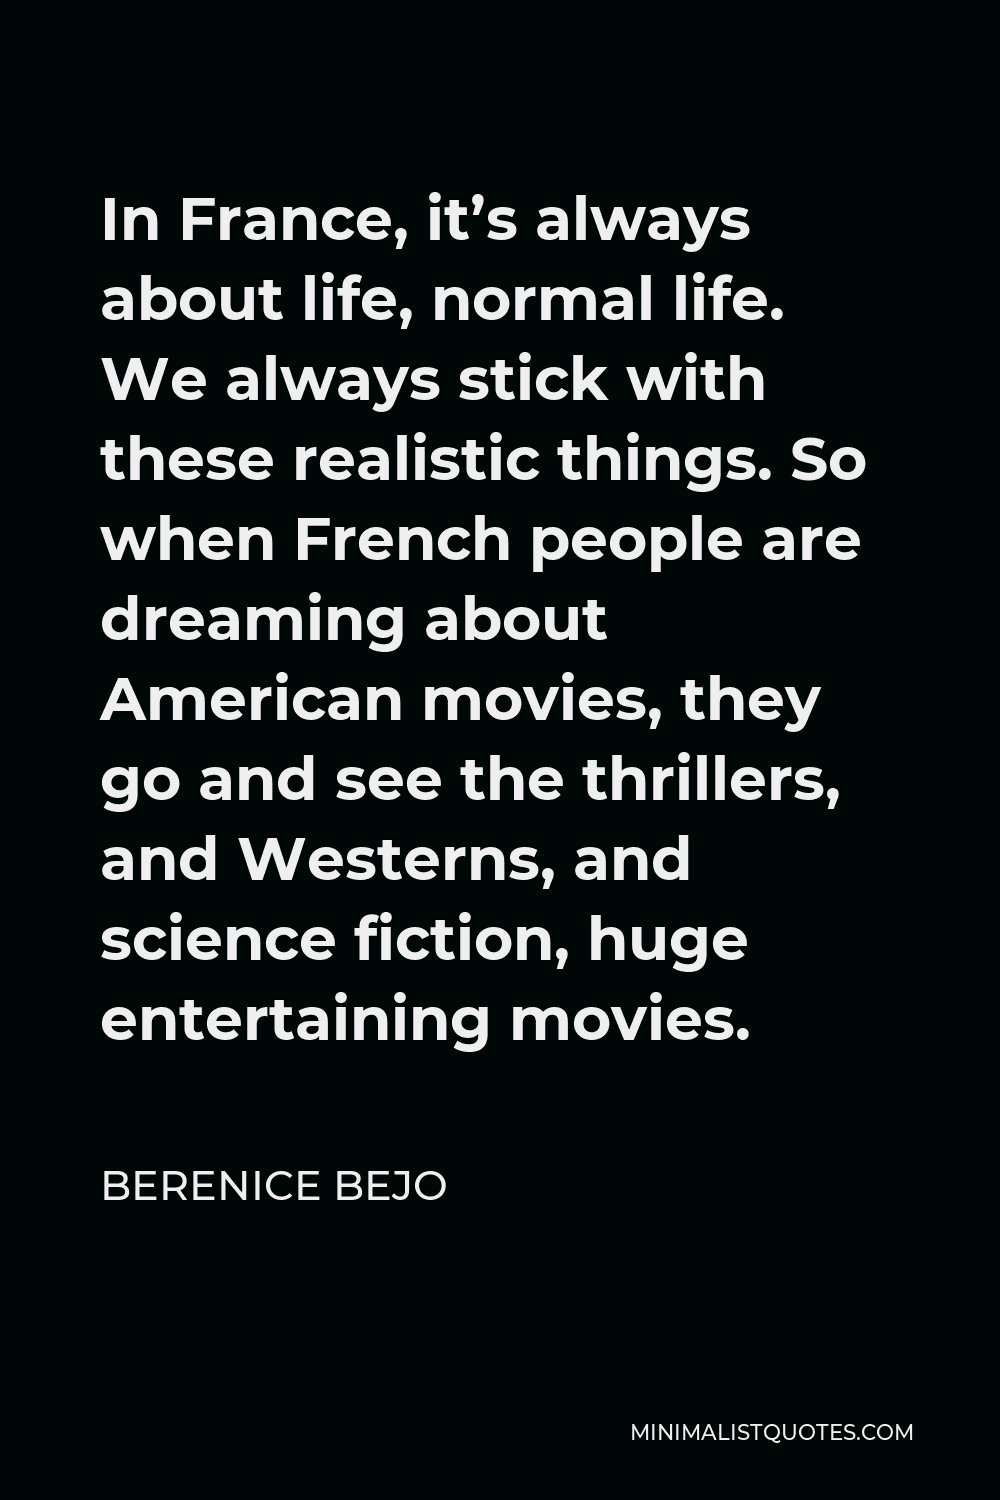 Berenice Bejo Quote - In France, it’s always about life, normal life. We always stick with these realistic things. So when French people are dreaming about American movies, they go and see the thrillers, and Westerns, and science fiction, huge entertaining movies.